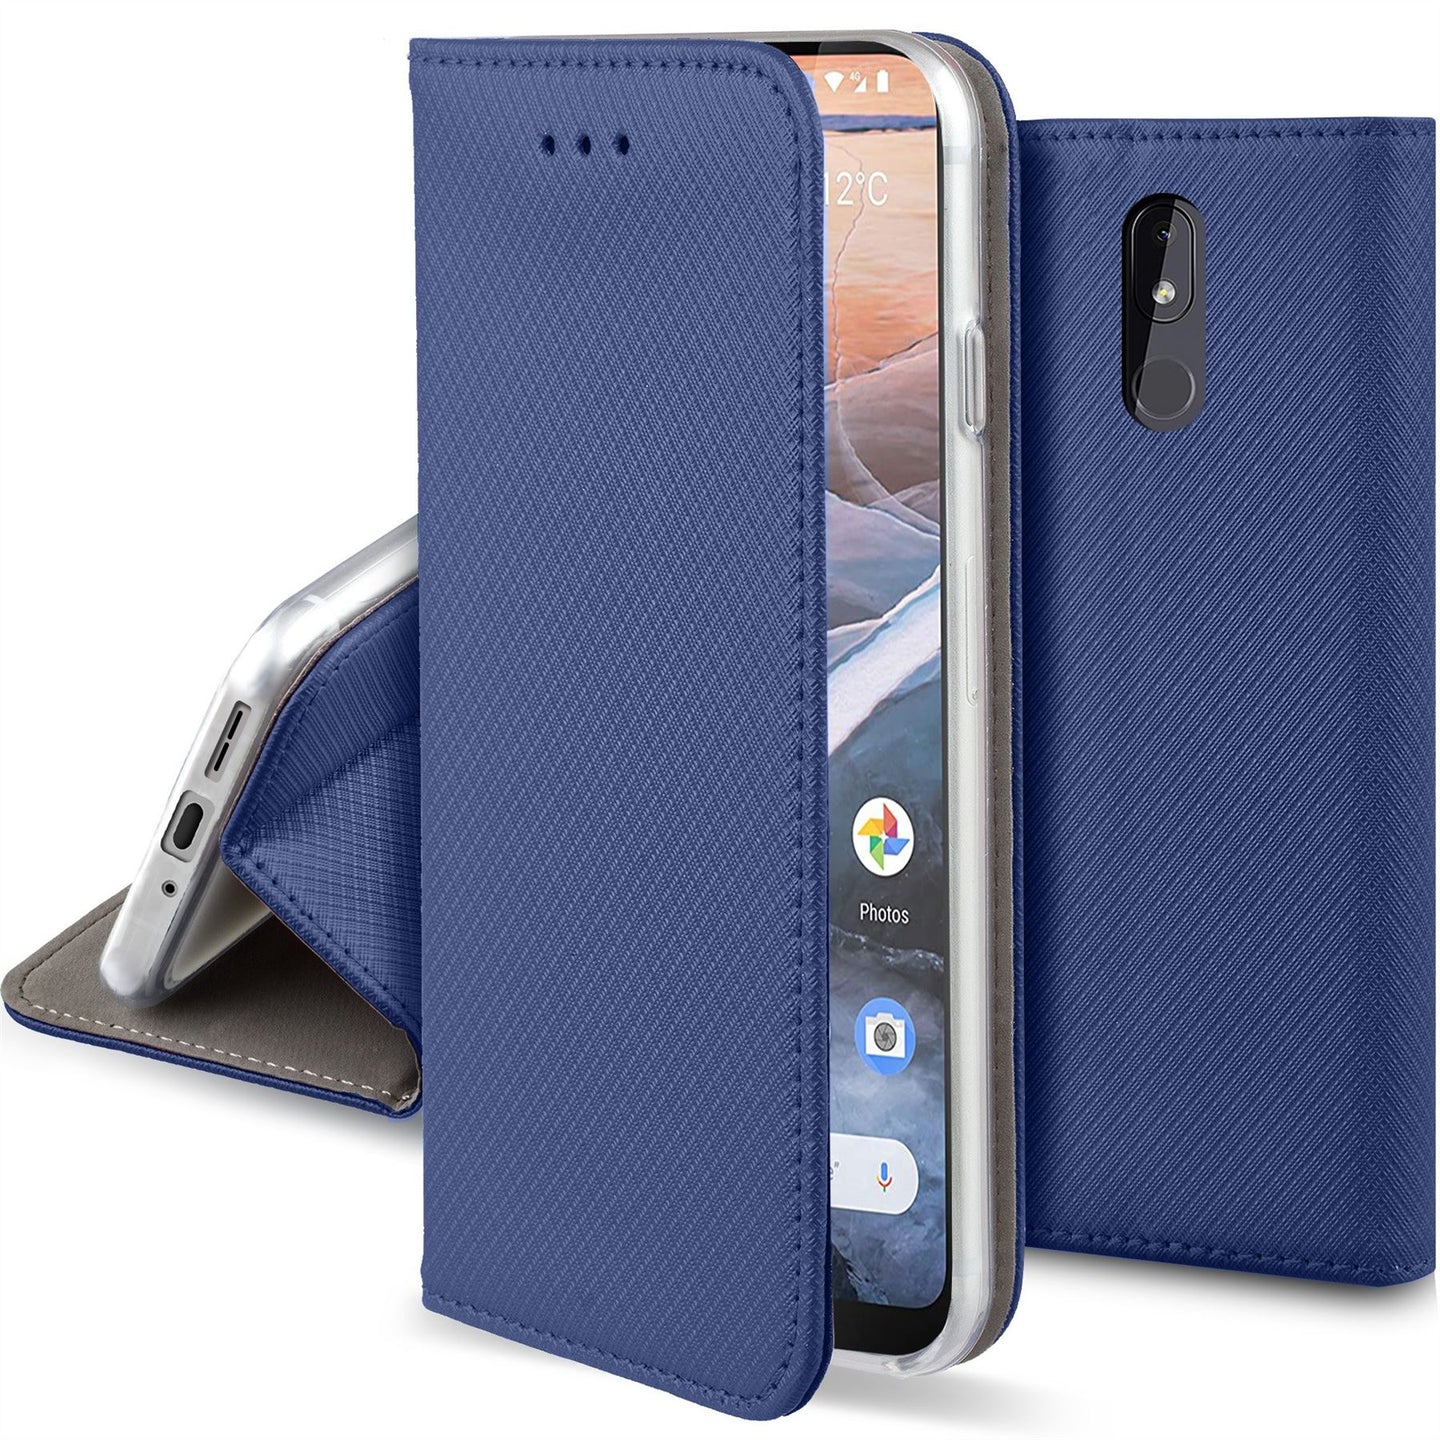 Moozy Case Flip Cover for Nokia 3.2, Dark Blue - Smart Magnetic Flip Case with Card Holder and Stand